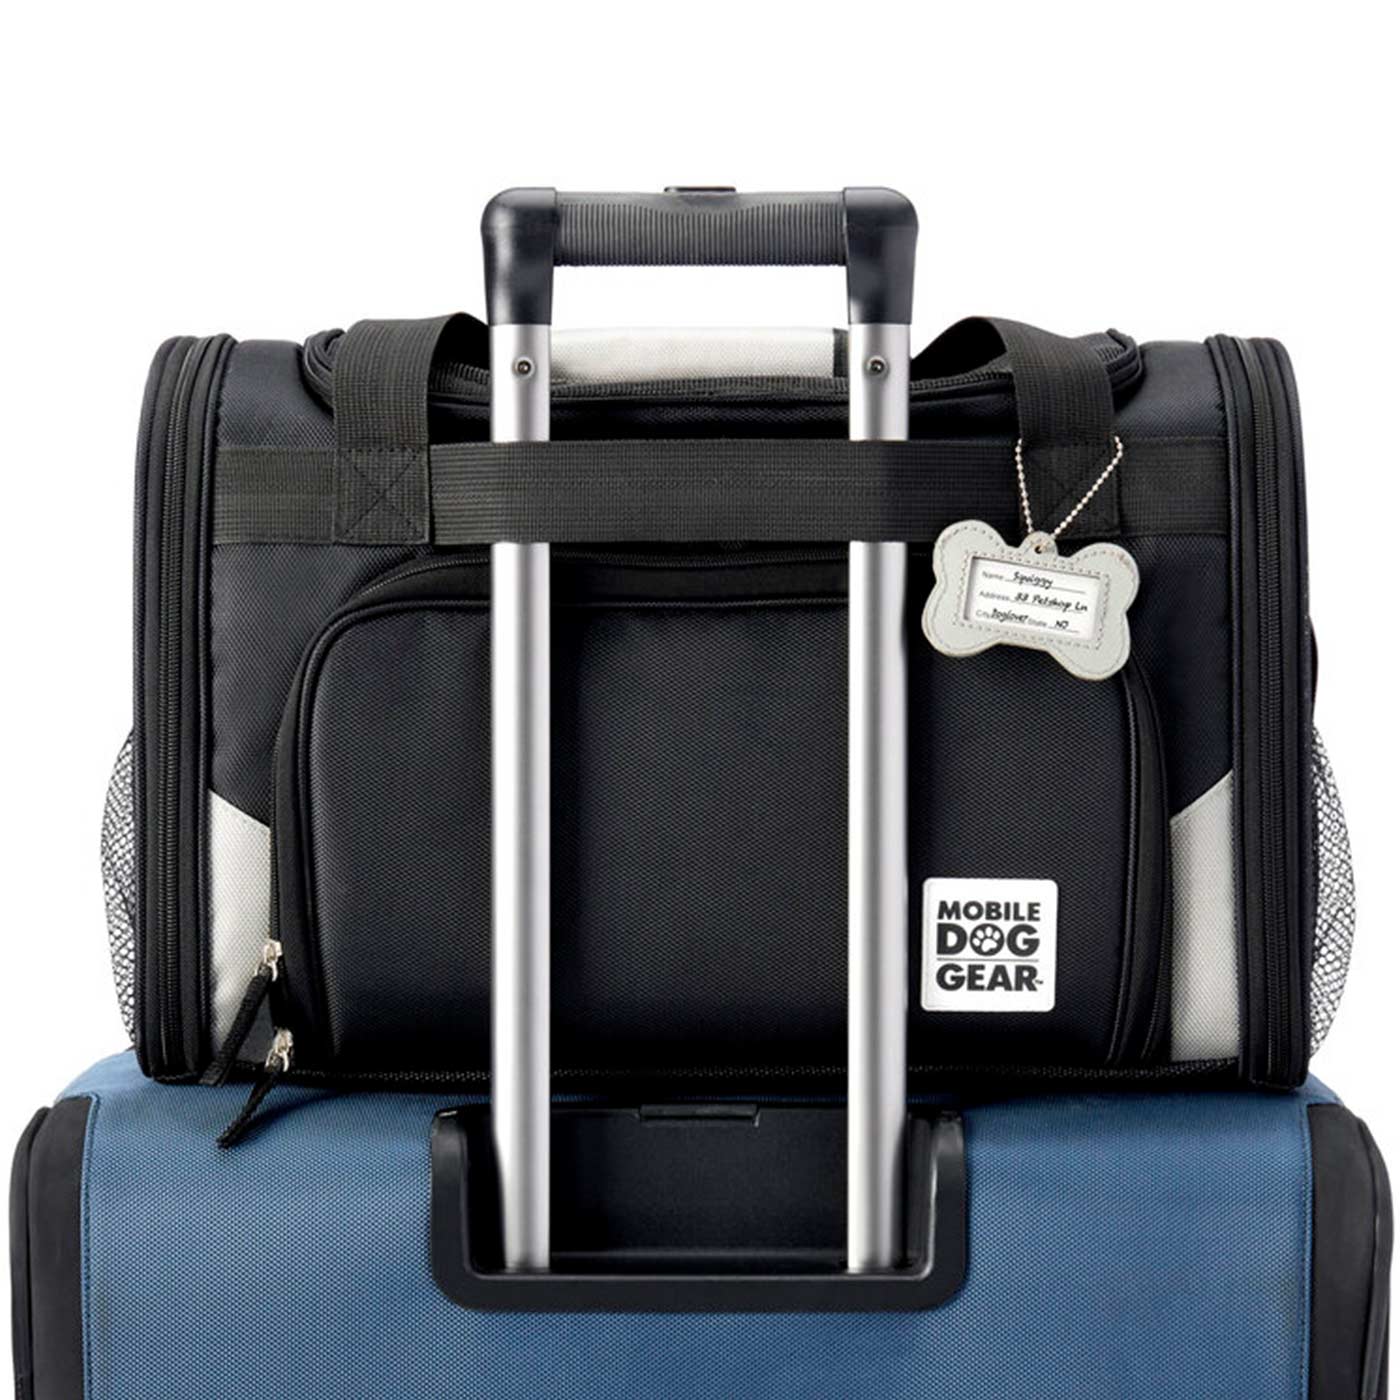 Mobile Dog Gear pet carrier plus on top of holiday luggage